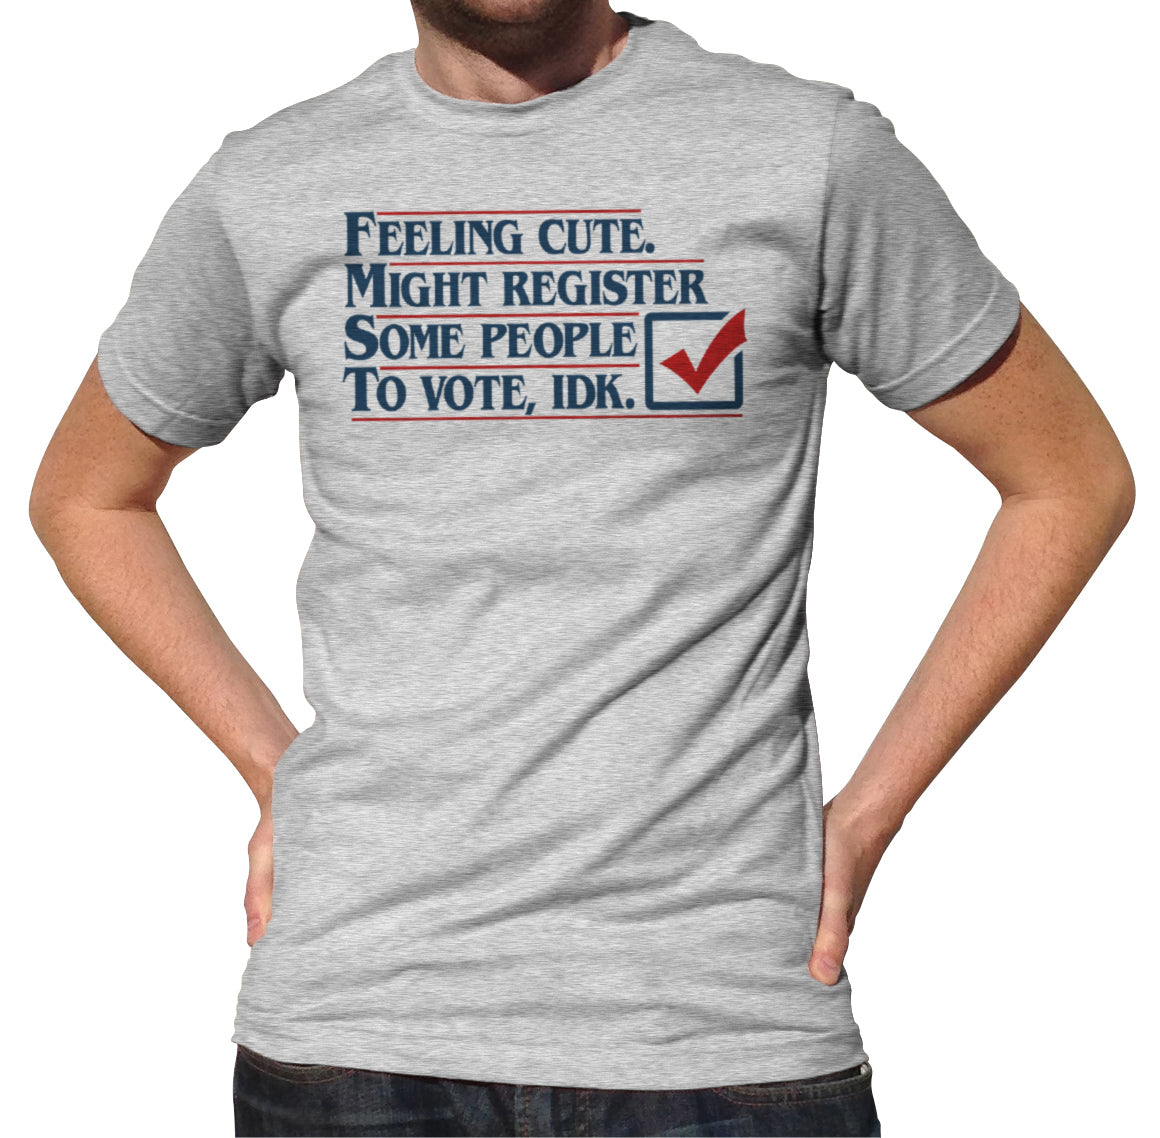 Men's Feeling Cute Might Register Some People to Vote T-Shirt